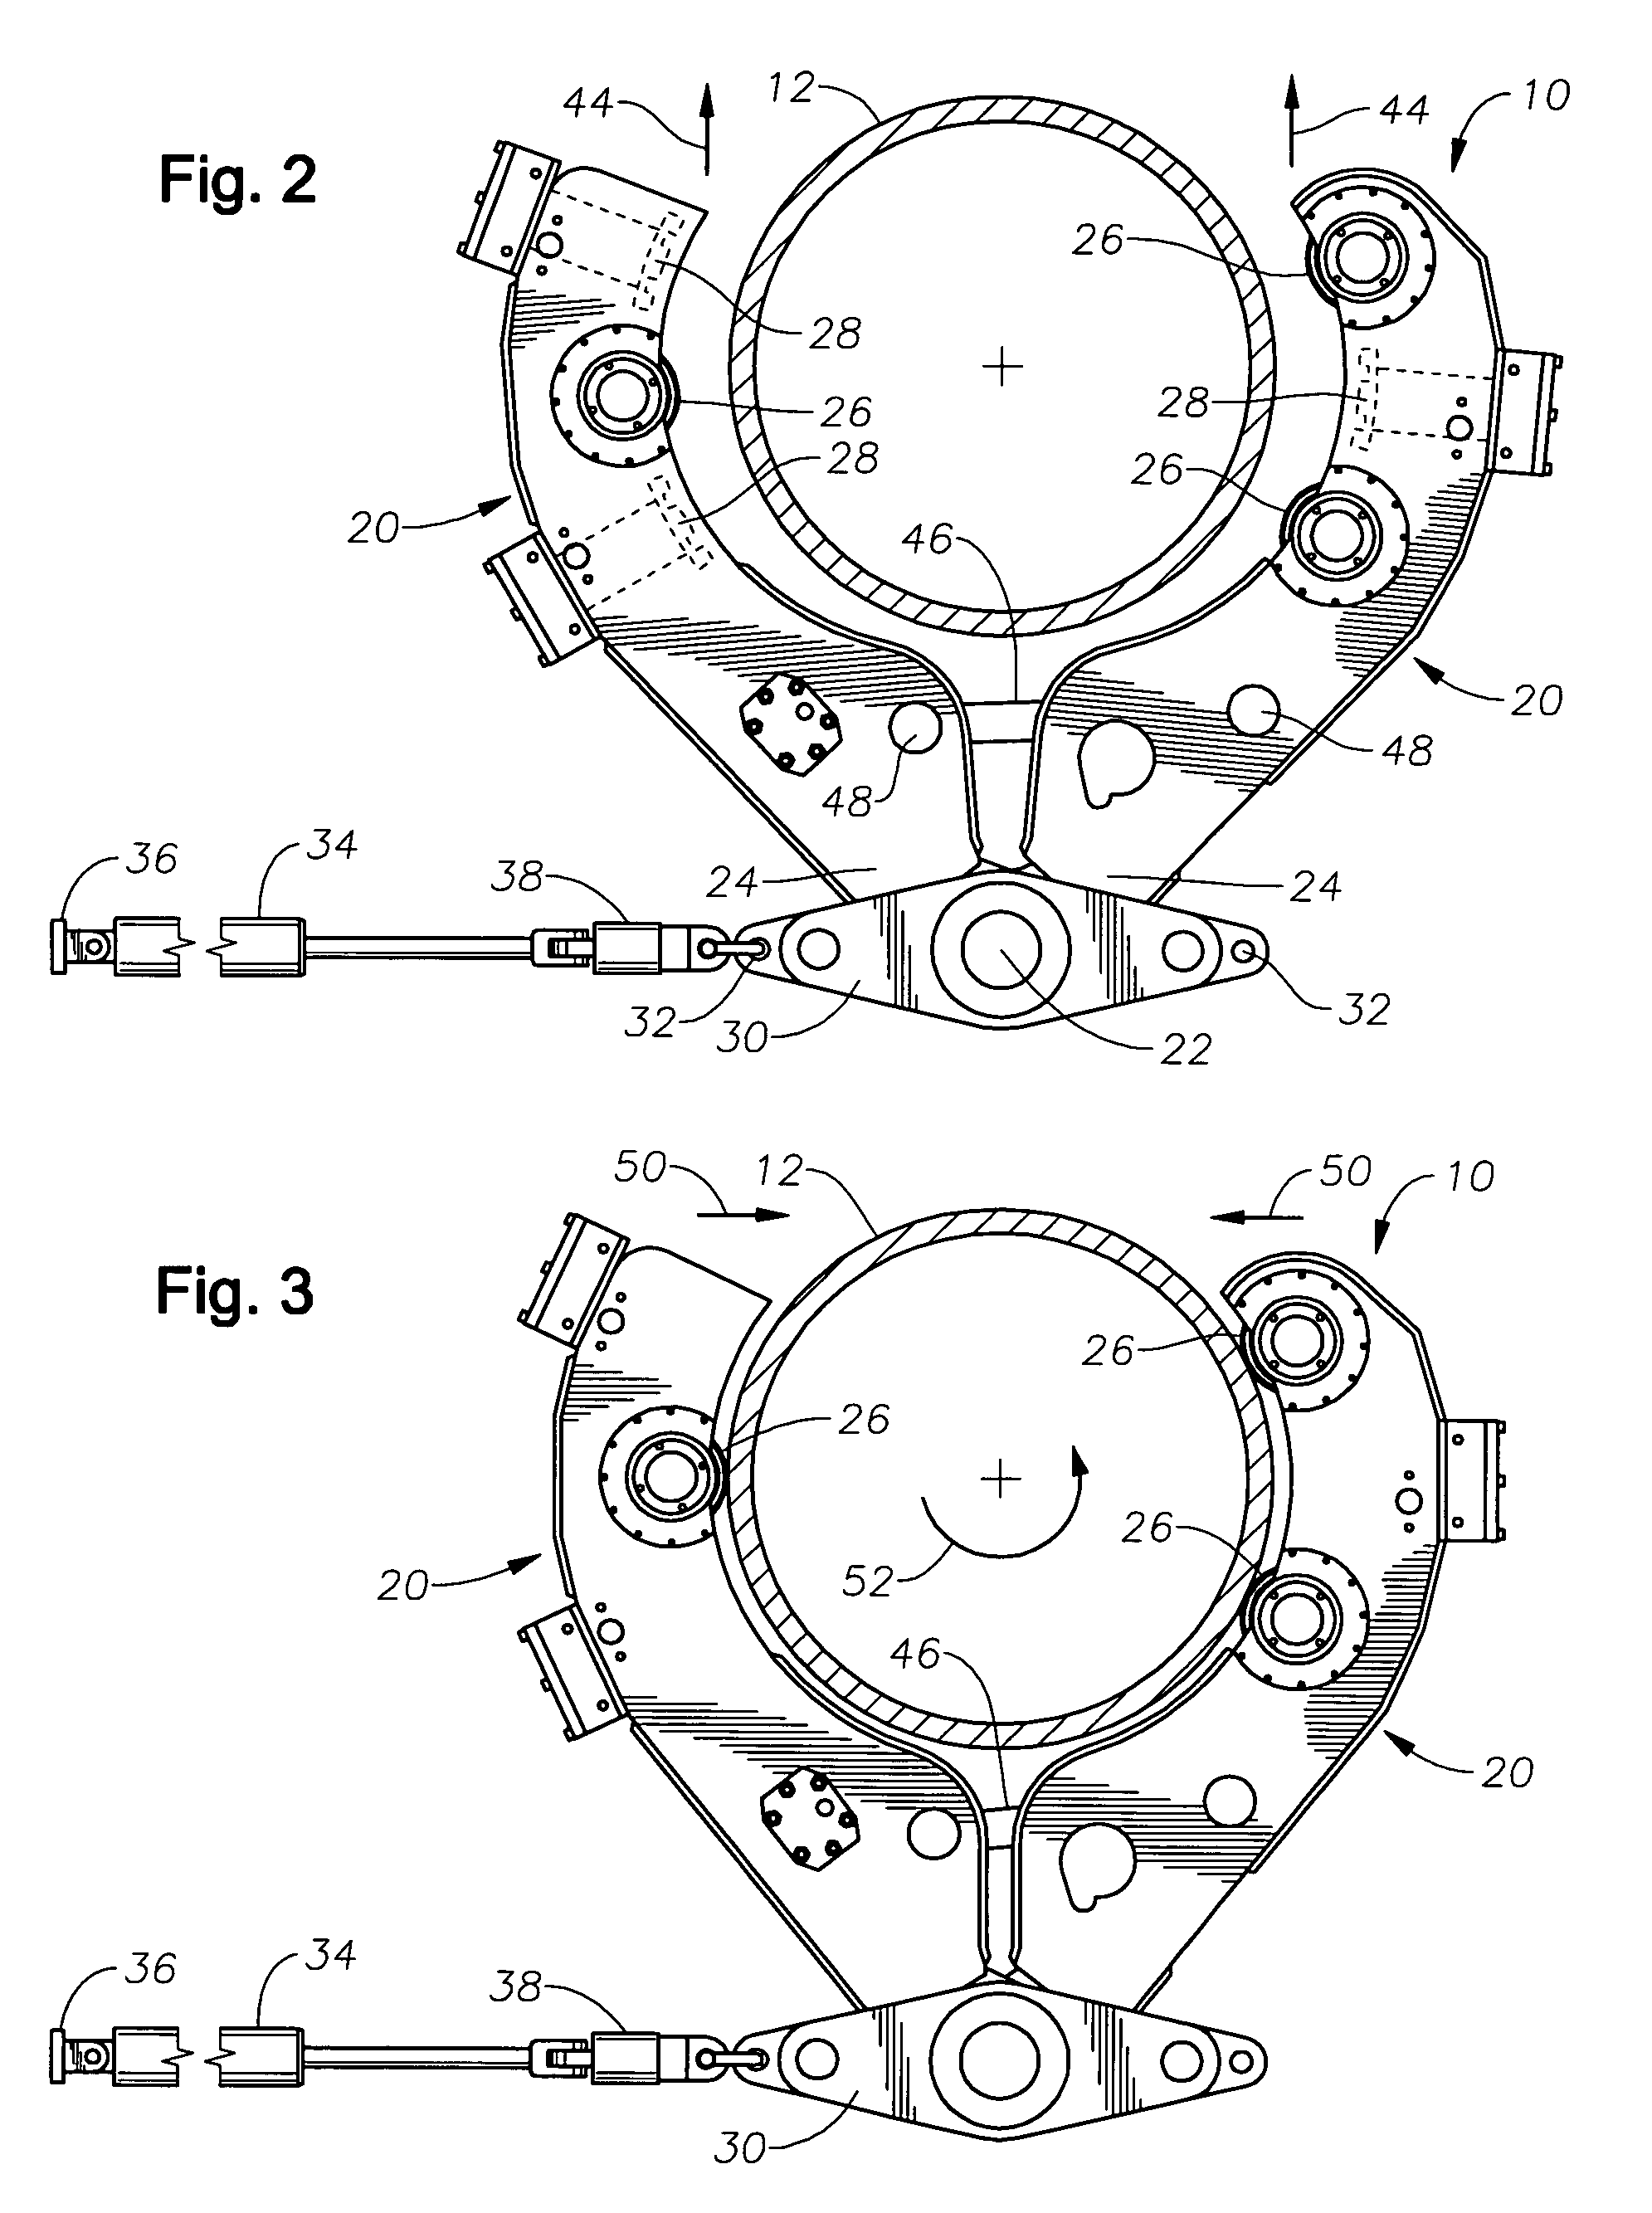 Method and apparatus for connecting and disconnecting threaded tubulars